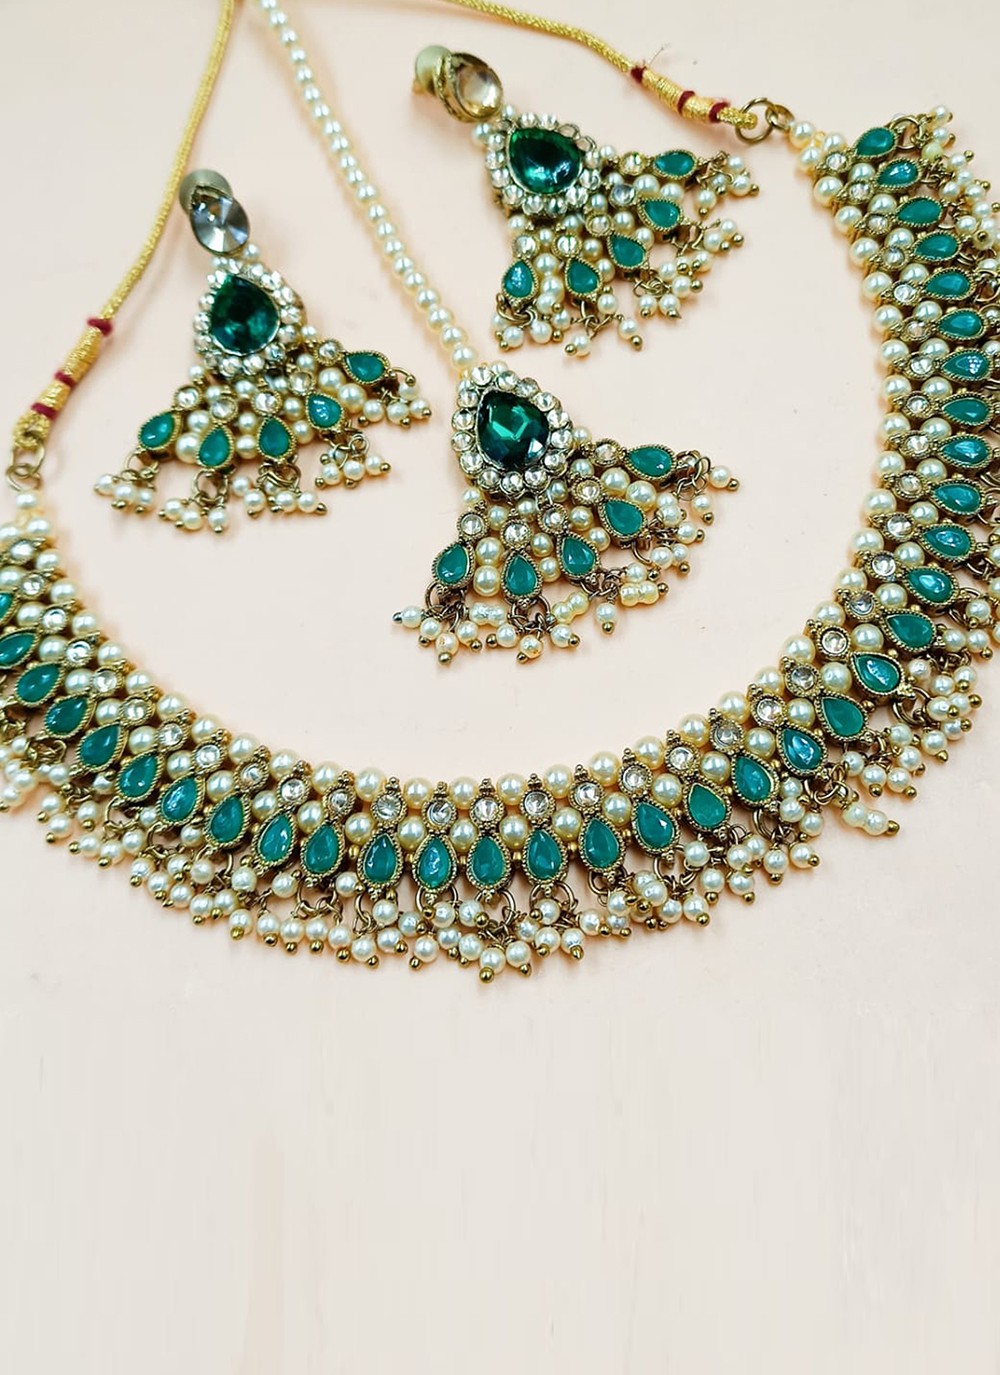 Stone Work Necklace Set in Gold and Turquoise